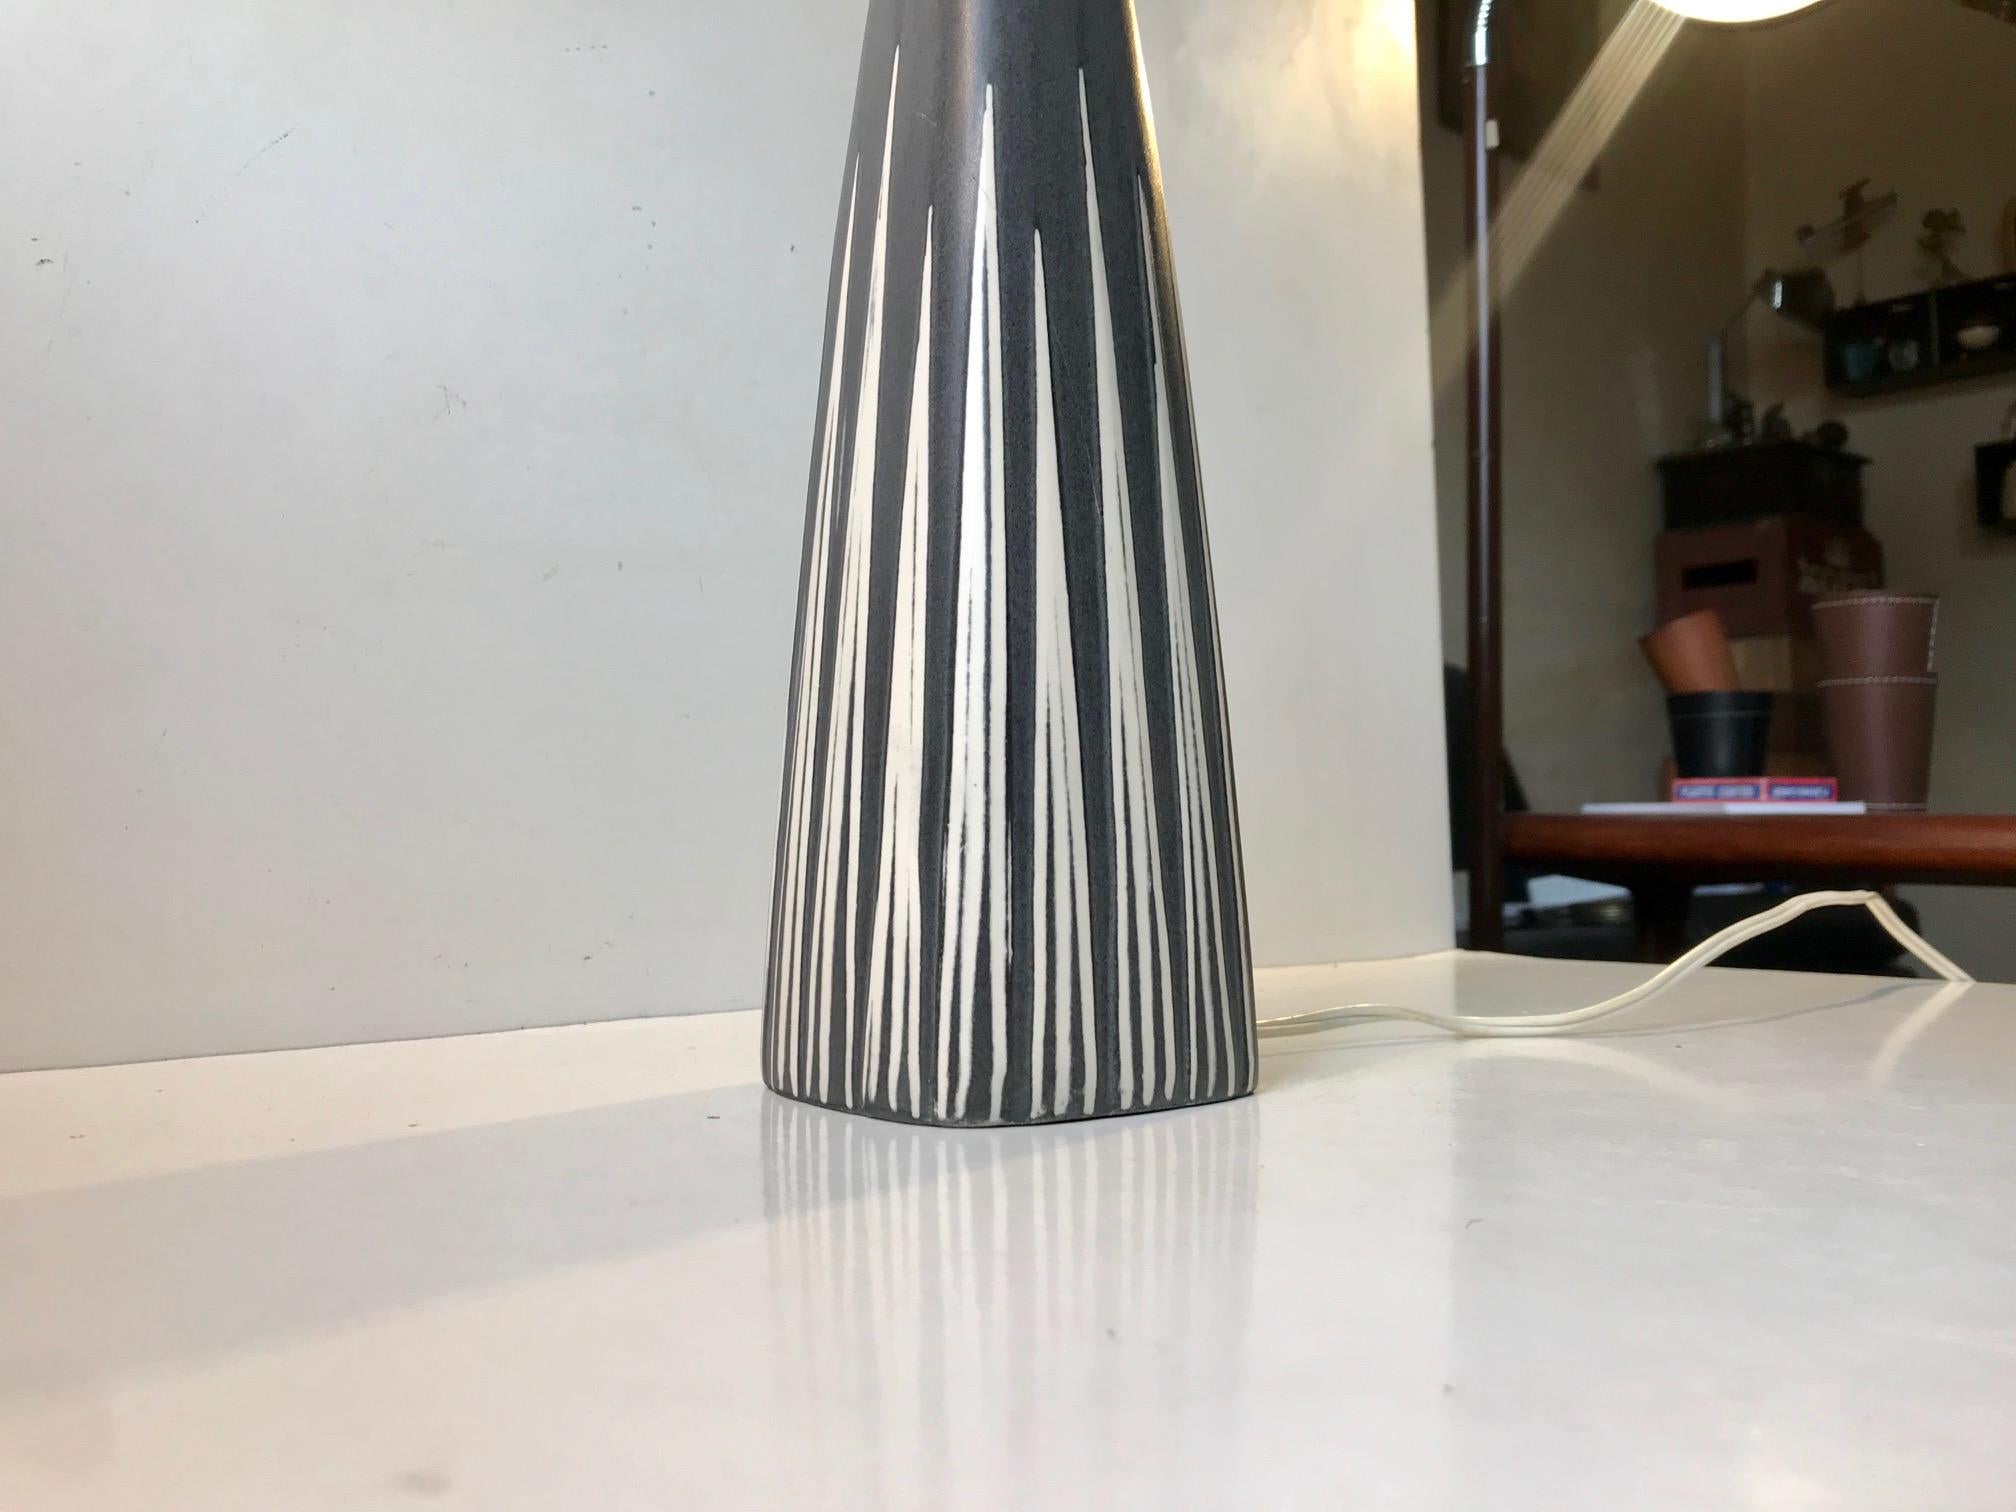 Mid-20th Century Striped Ceramic Table Lamp by Svend Aage Holm-Sørensen for Søholm, 1960s For Sale